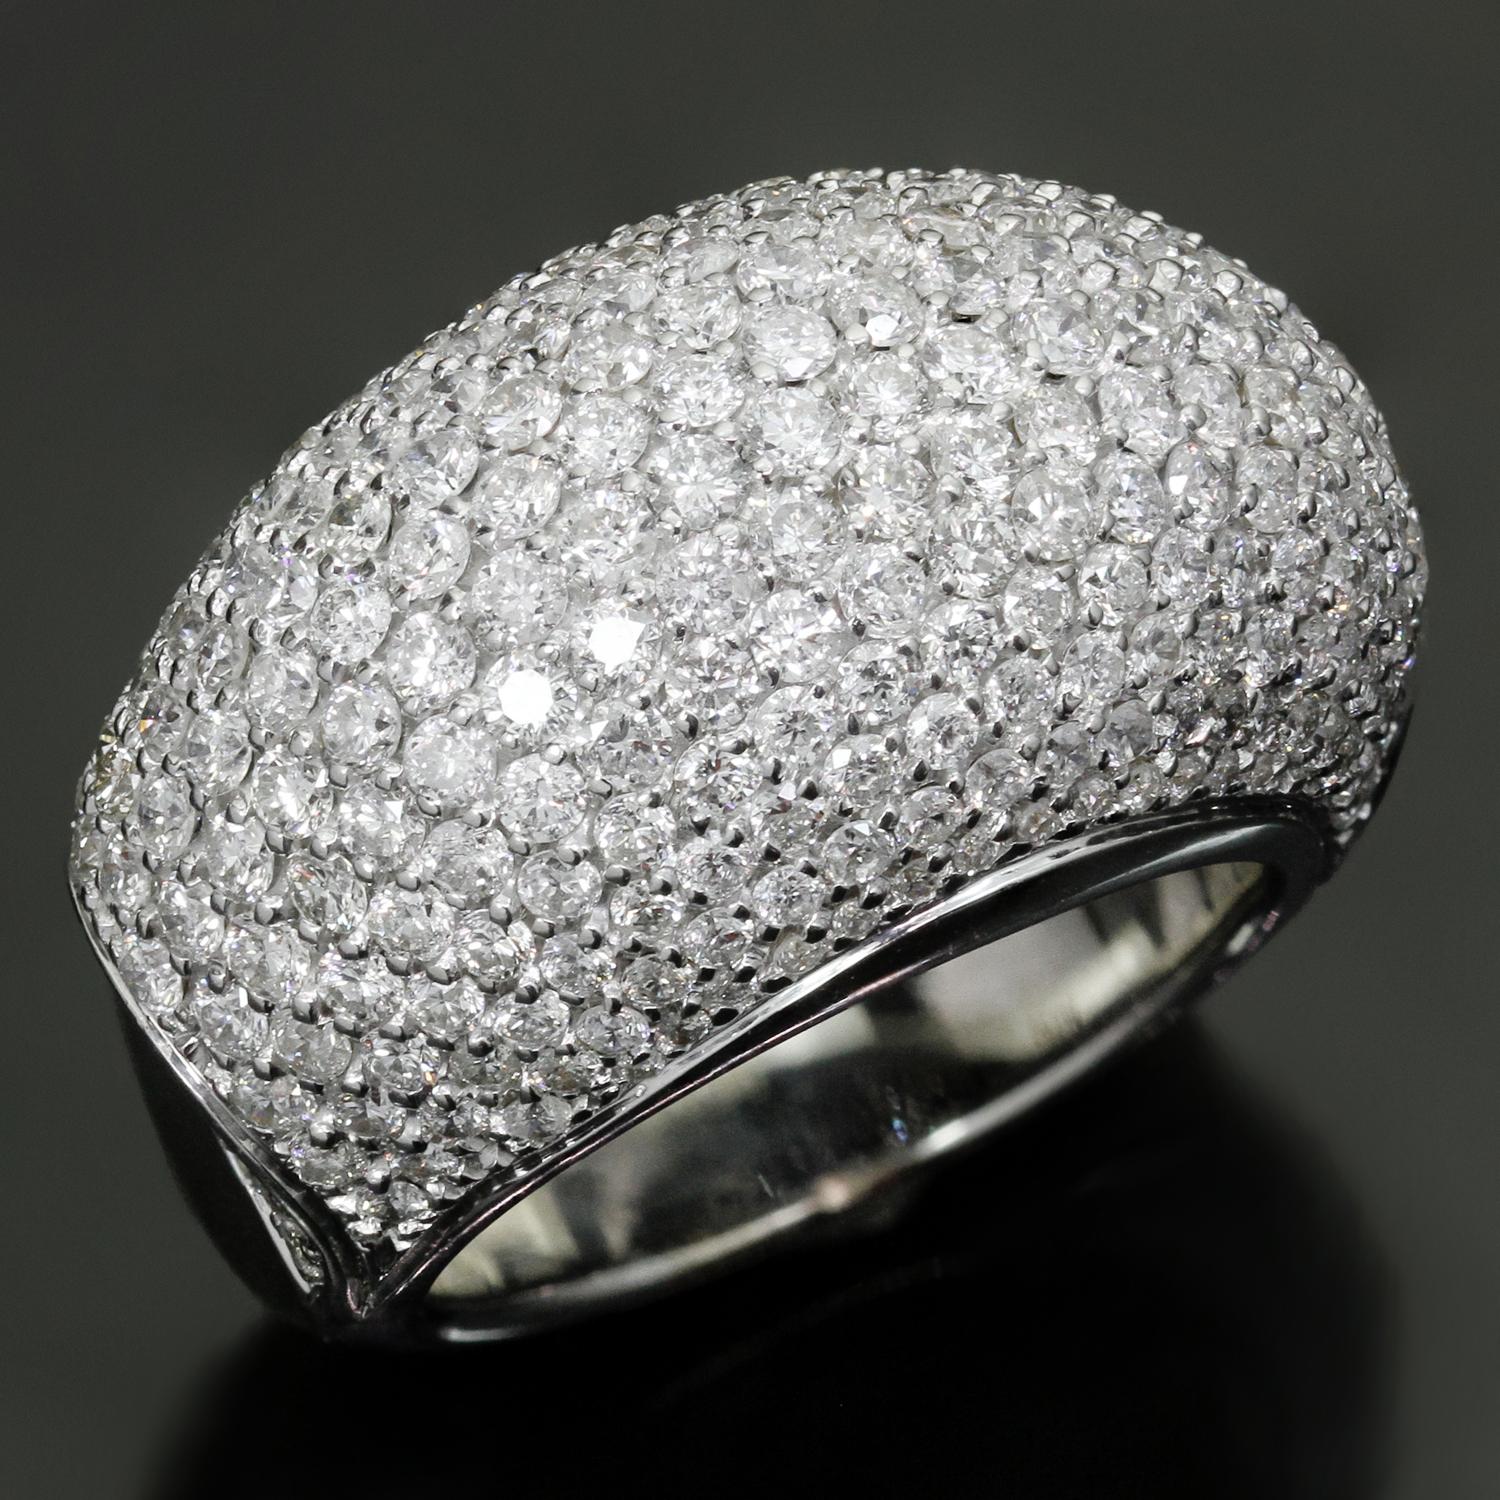 This chic and fabulous domed ring is crafted in 18k white gold and set with round brilliant F-G VVS2-VS1 diamonds weighing an estimated 3.40 carats. Made in United States circa 2010. Measurements: 0.59